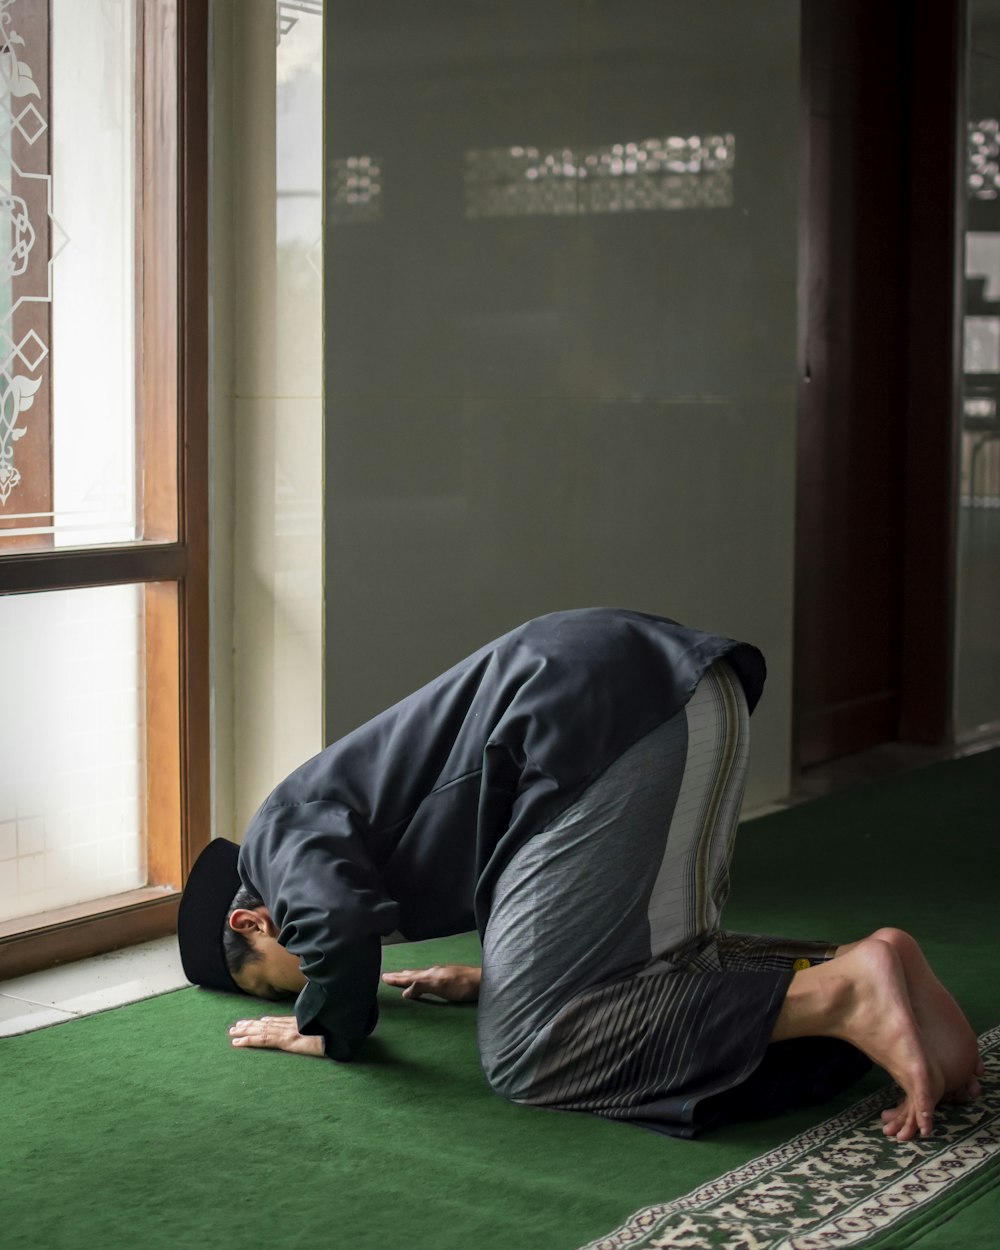 a man kneeling down on a rug in front of a window